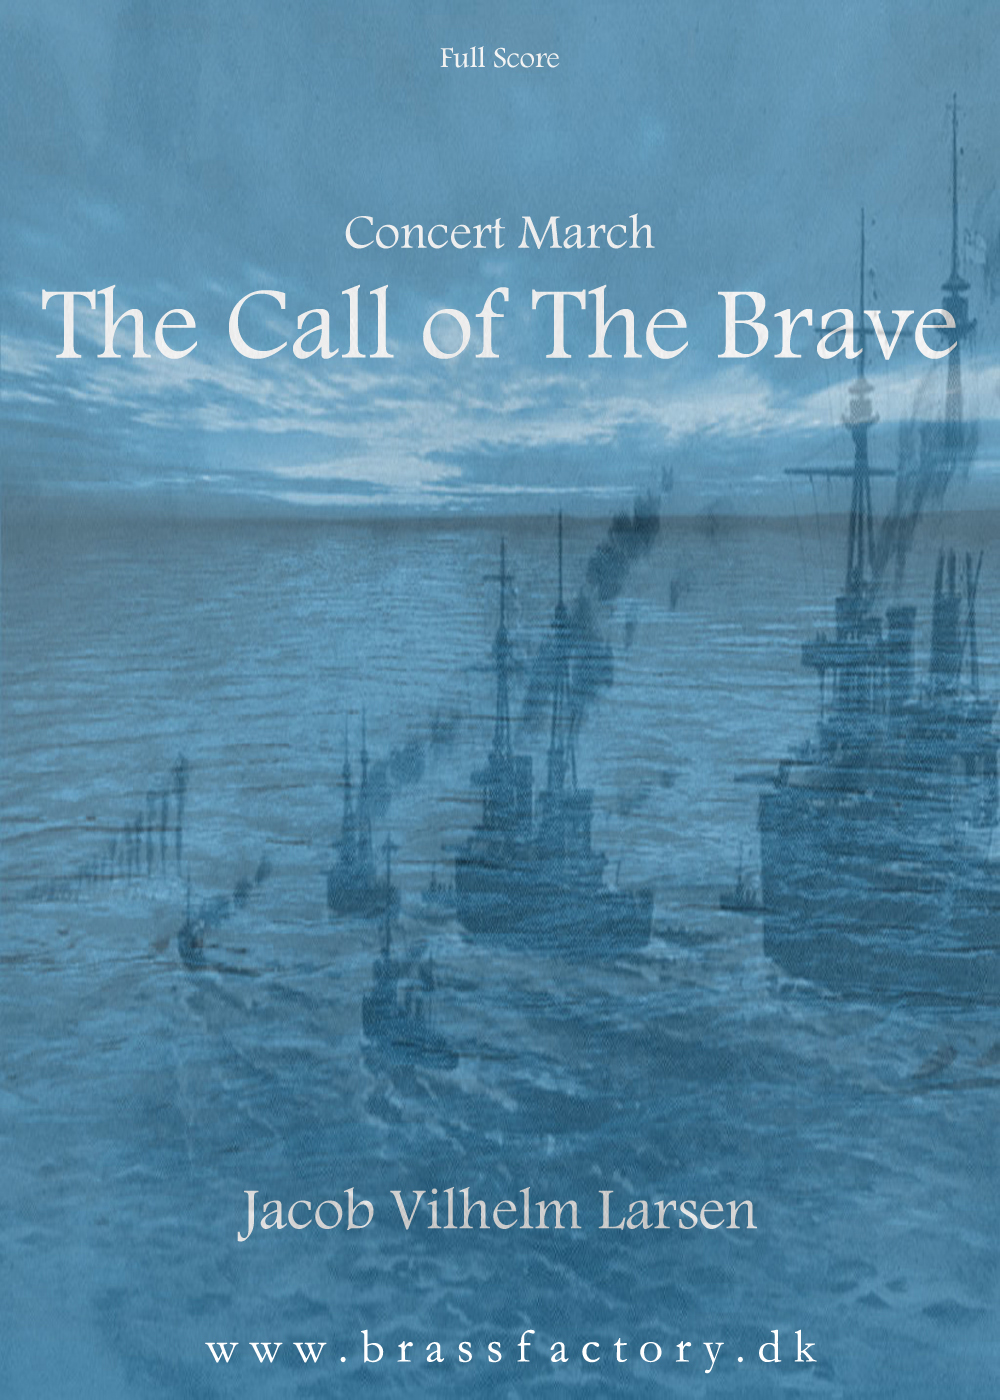 The Call of The Brave - Concert March